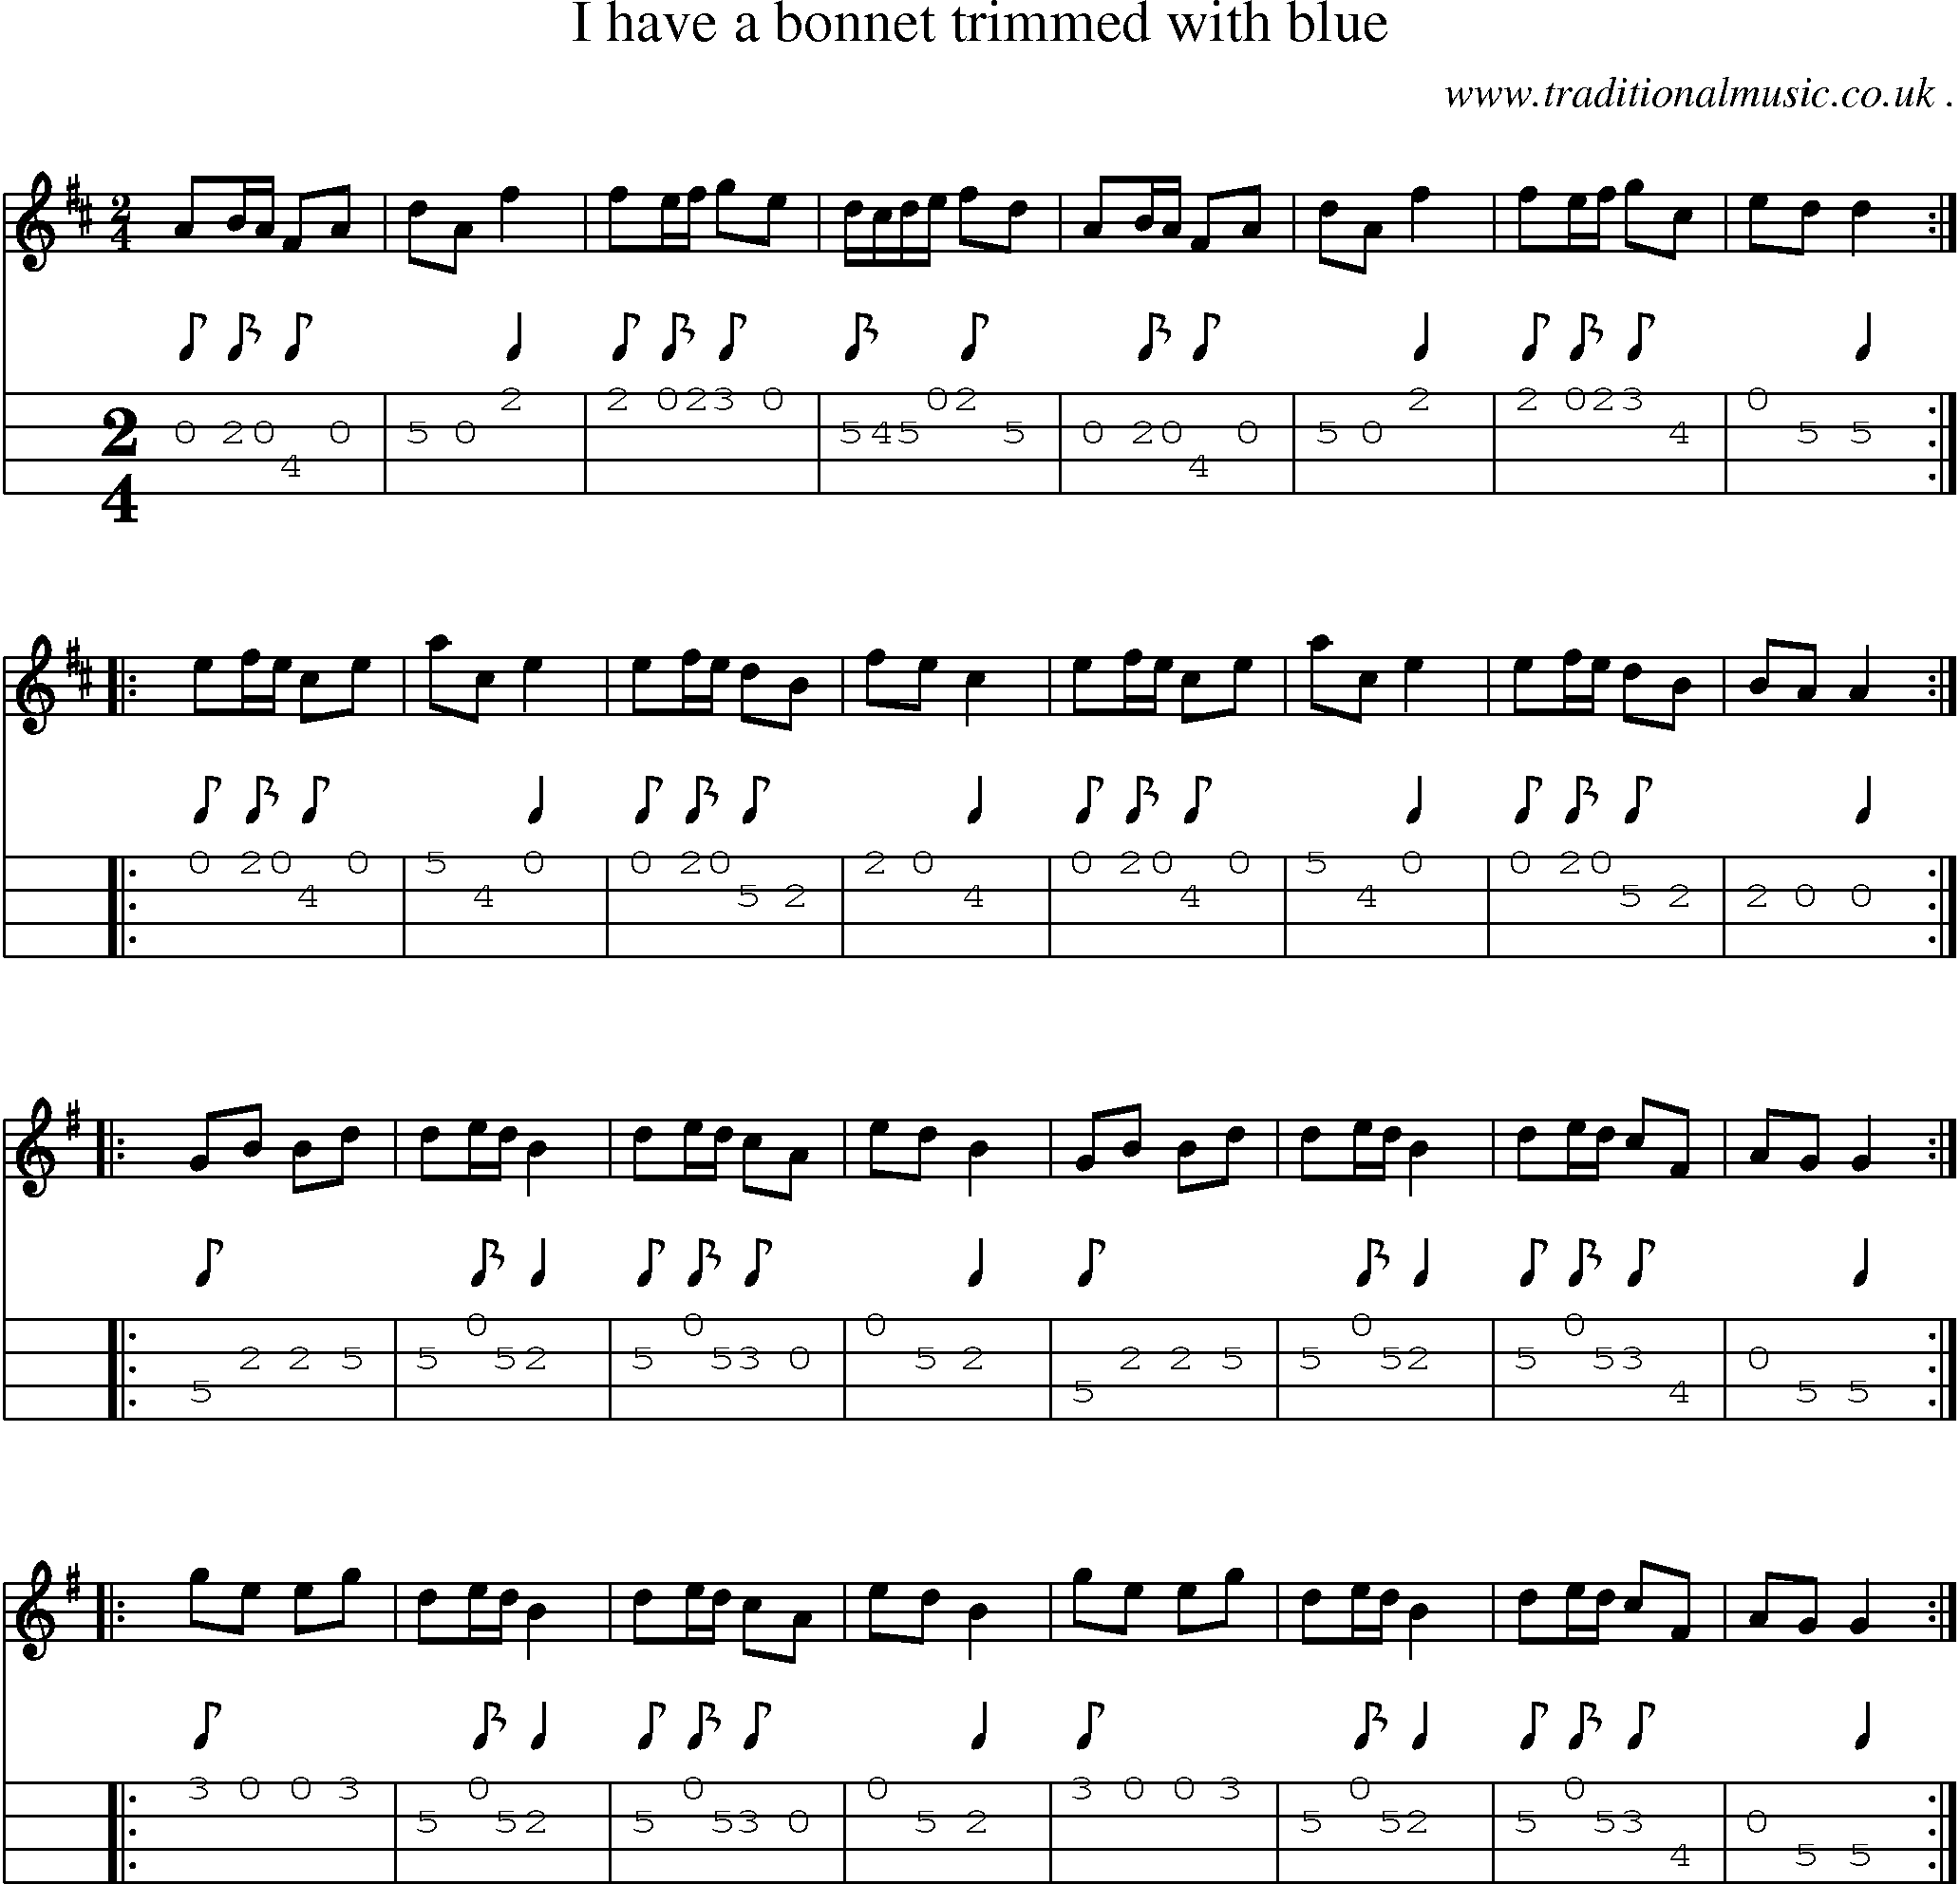 Sheet-music  score, Chords and Mandolin Tabs for I Have A Bonnet Trimmed With Blue